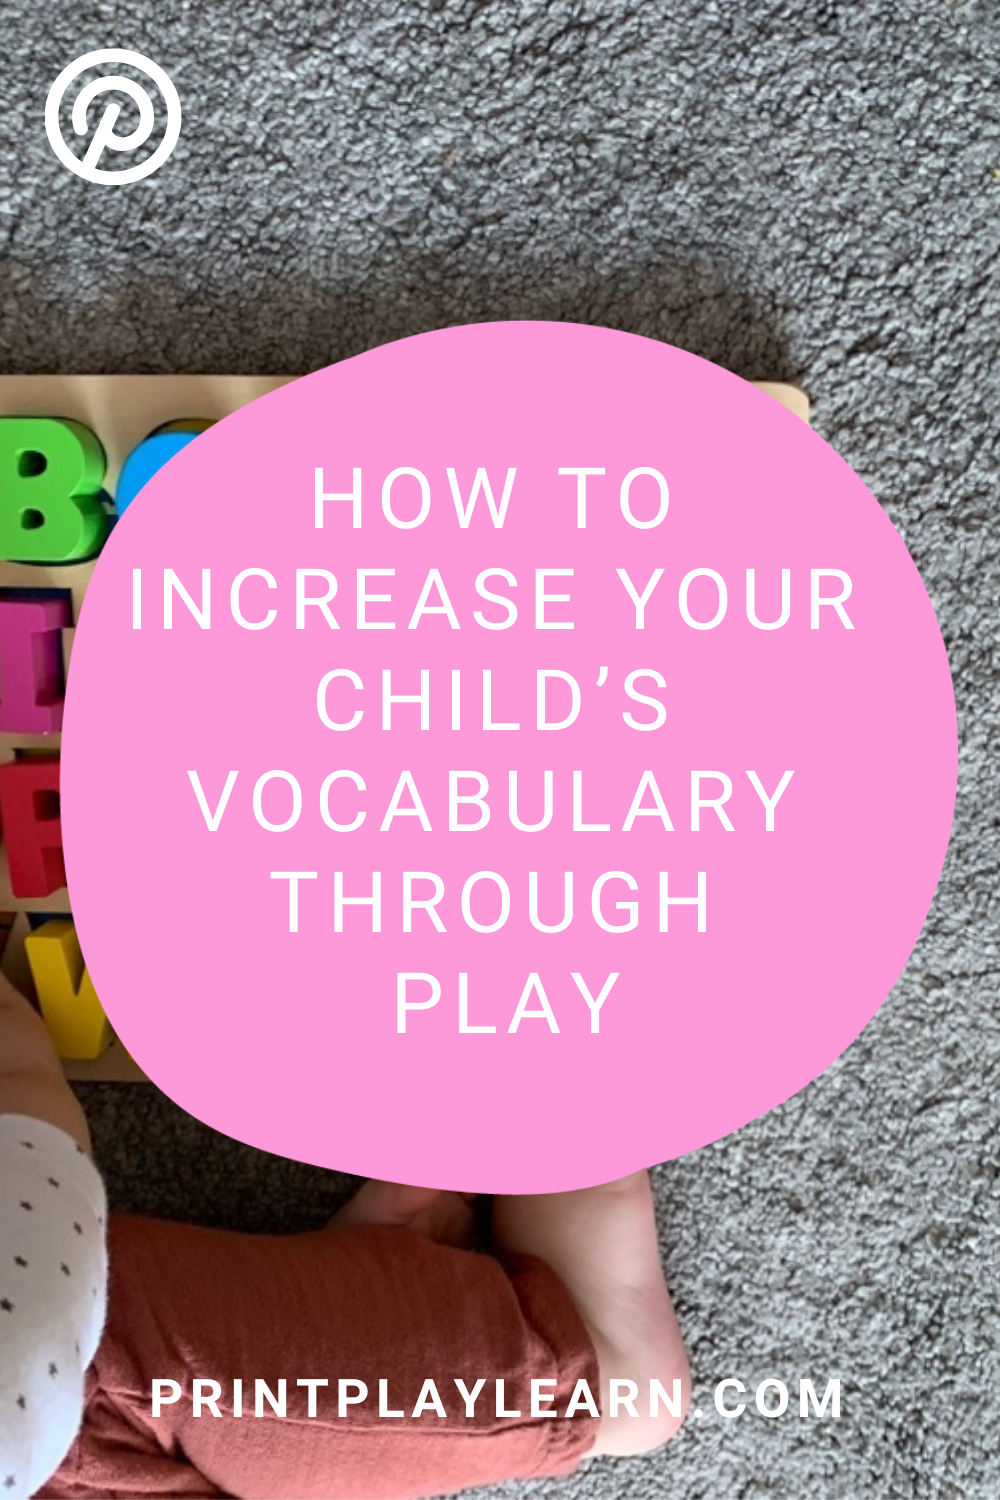 How to increase your child's vocabulary through play print play learn